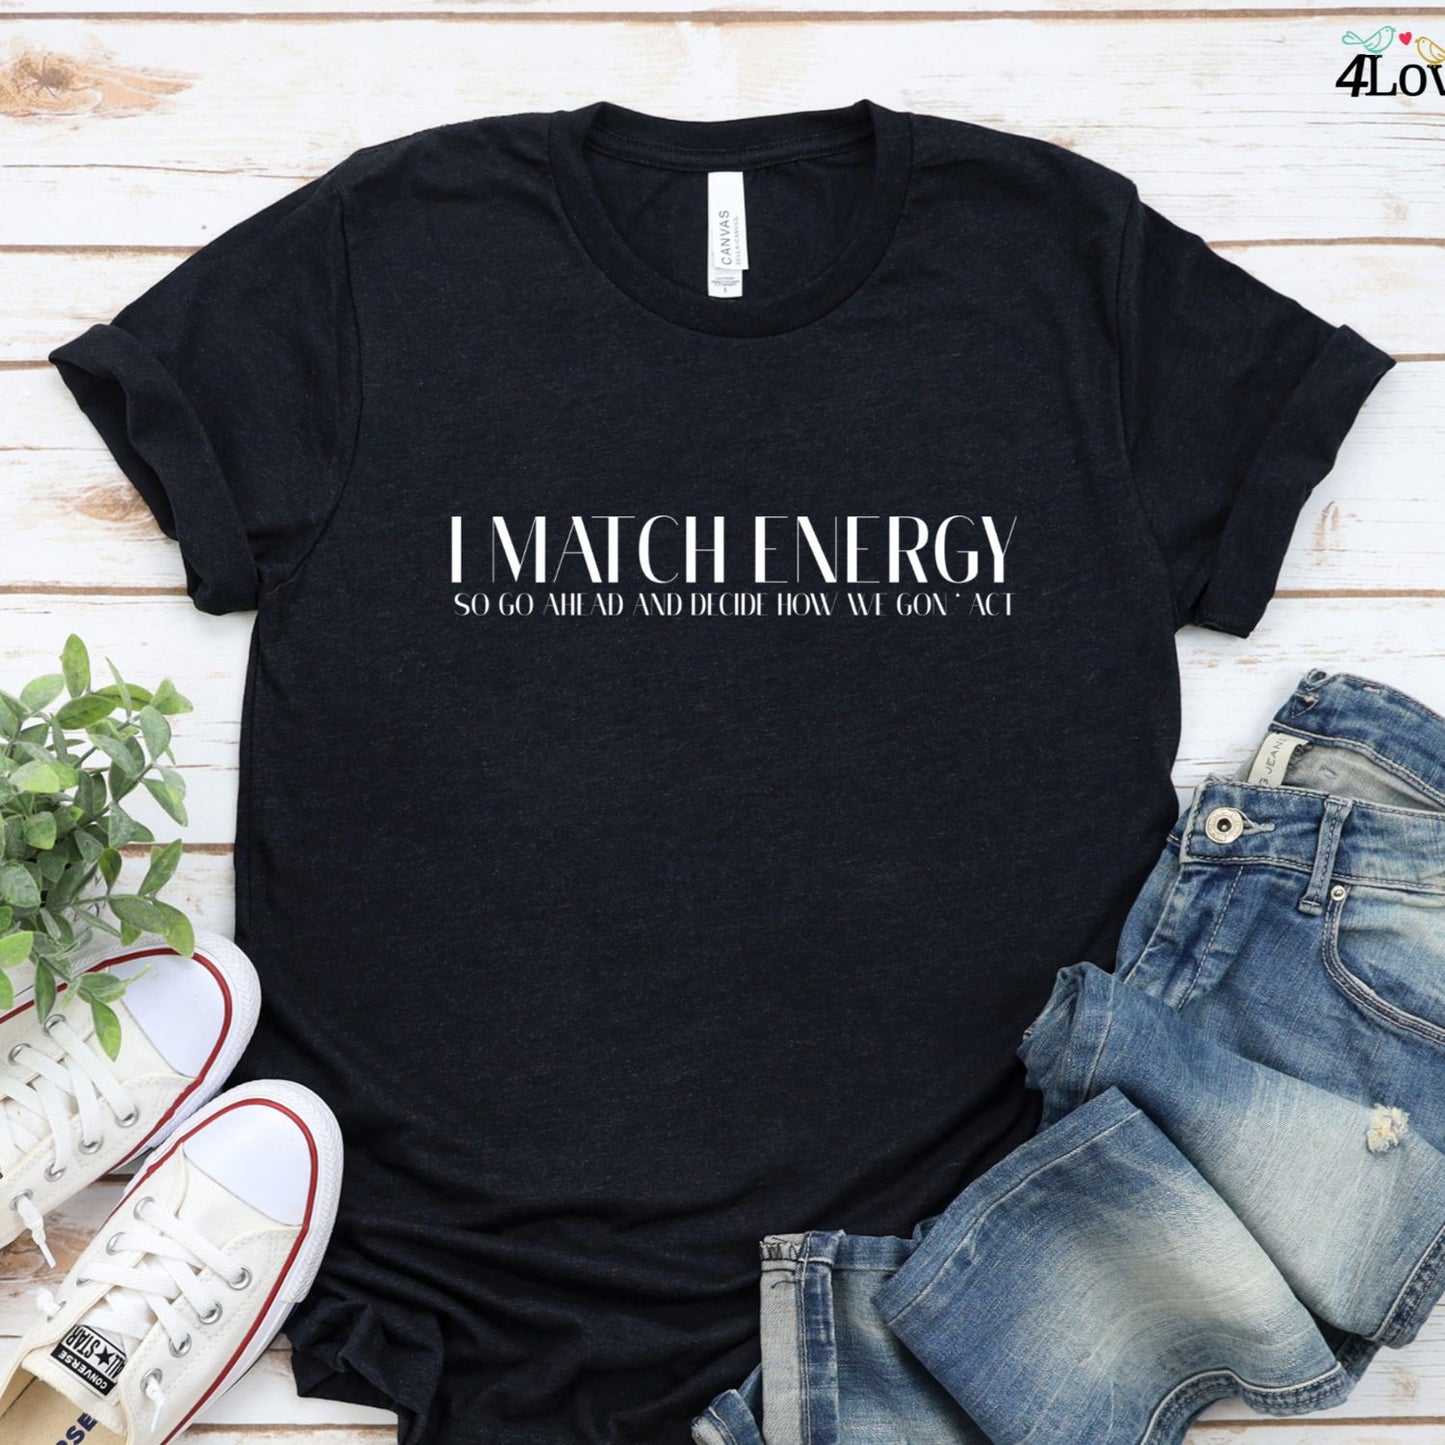 Matching Outfits Set: 'I Match Energy' Motivation - Black Owned Shop, Fall Fashion, Cute & Inspirational Autumn Style